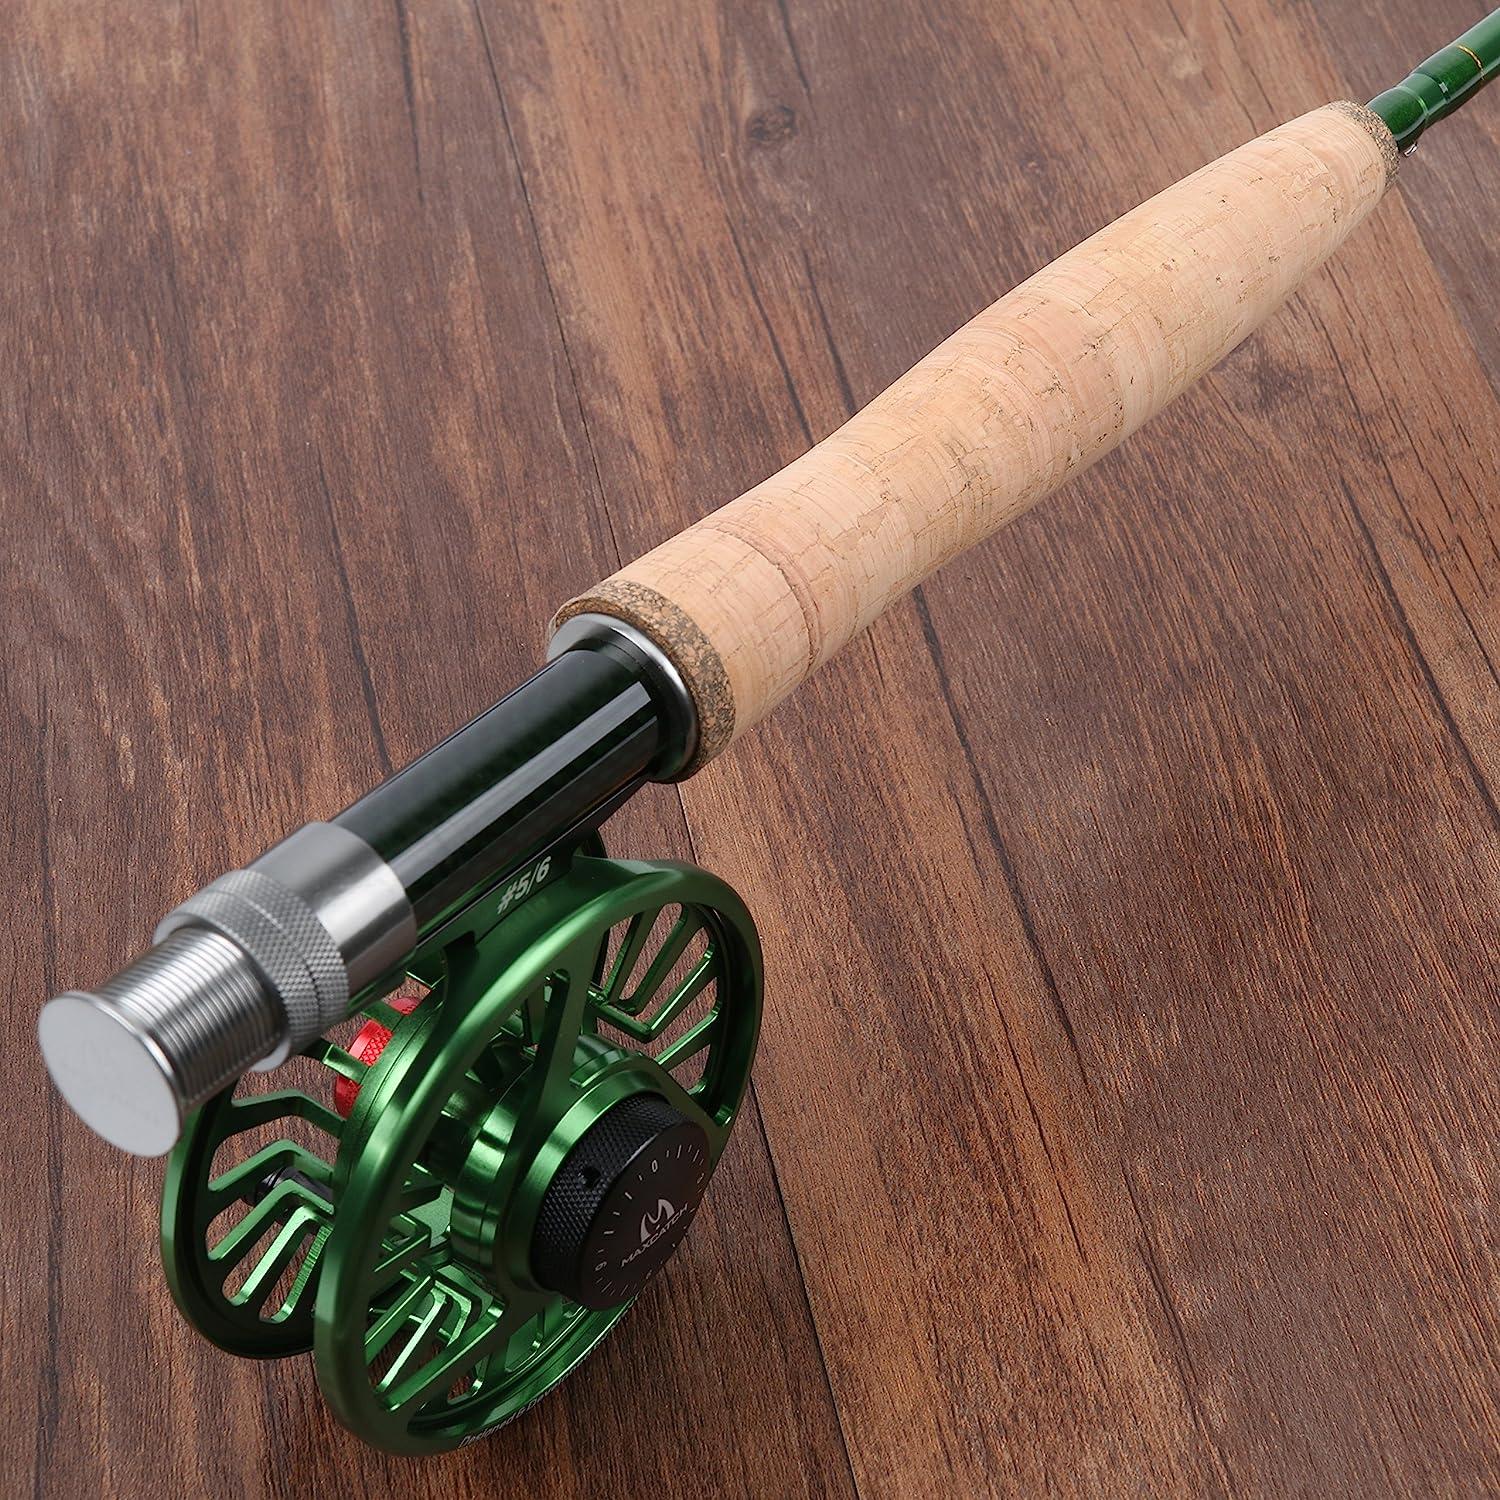 Fishing Rod Casting Rod Reel Seat - China Fly Rod Seat and Cork Grip price